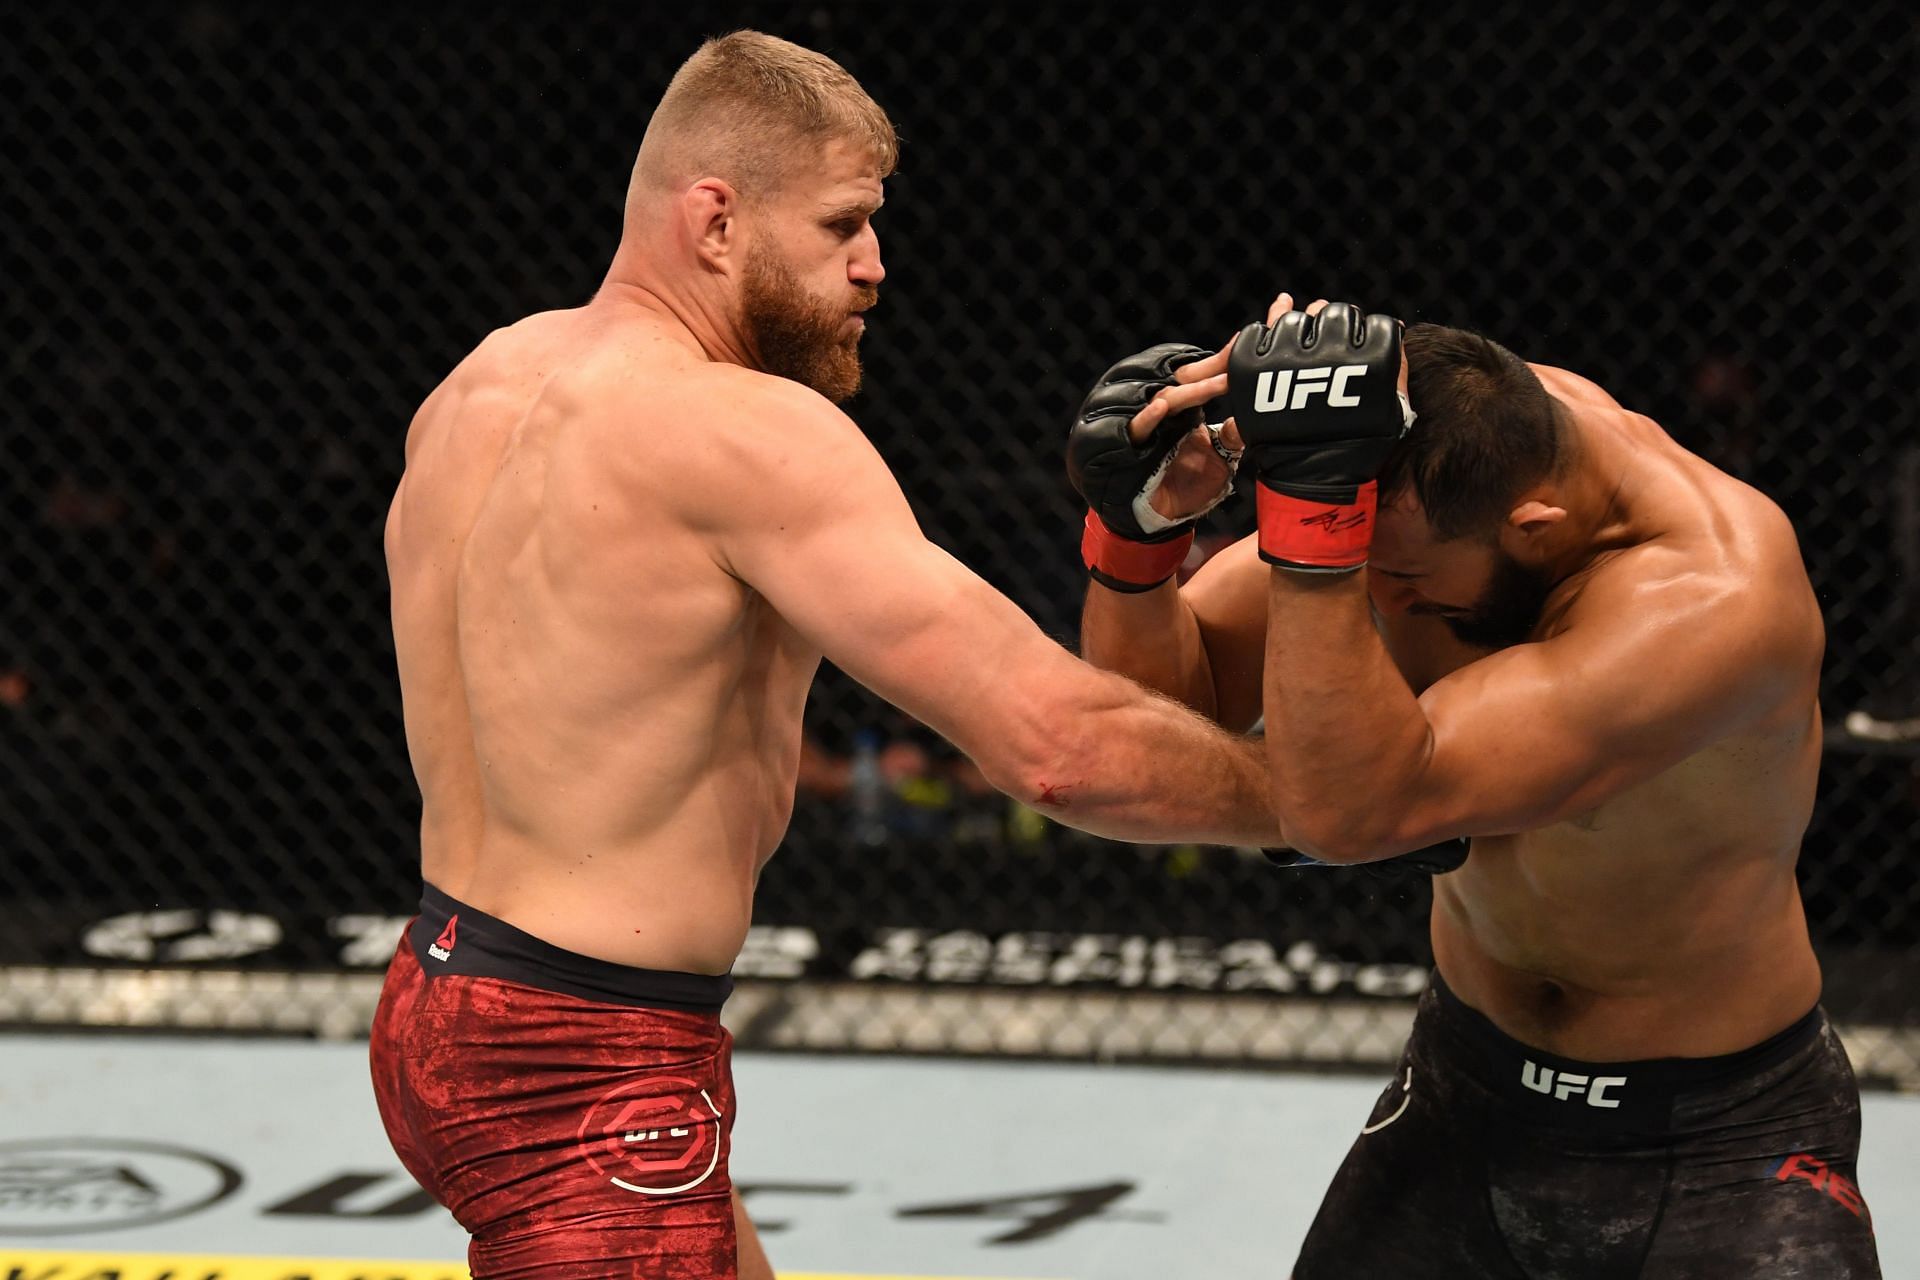 Blachowicz lost his belt to Teixeira on Saturday